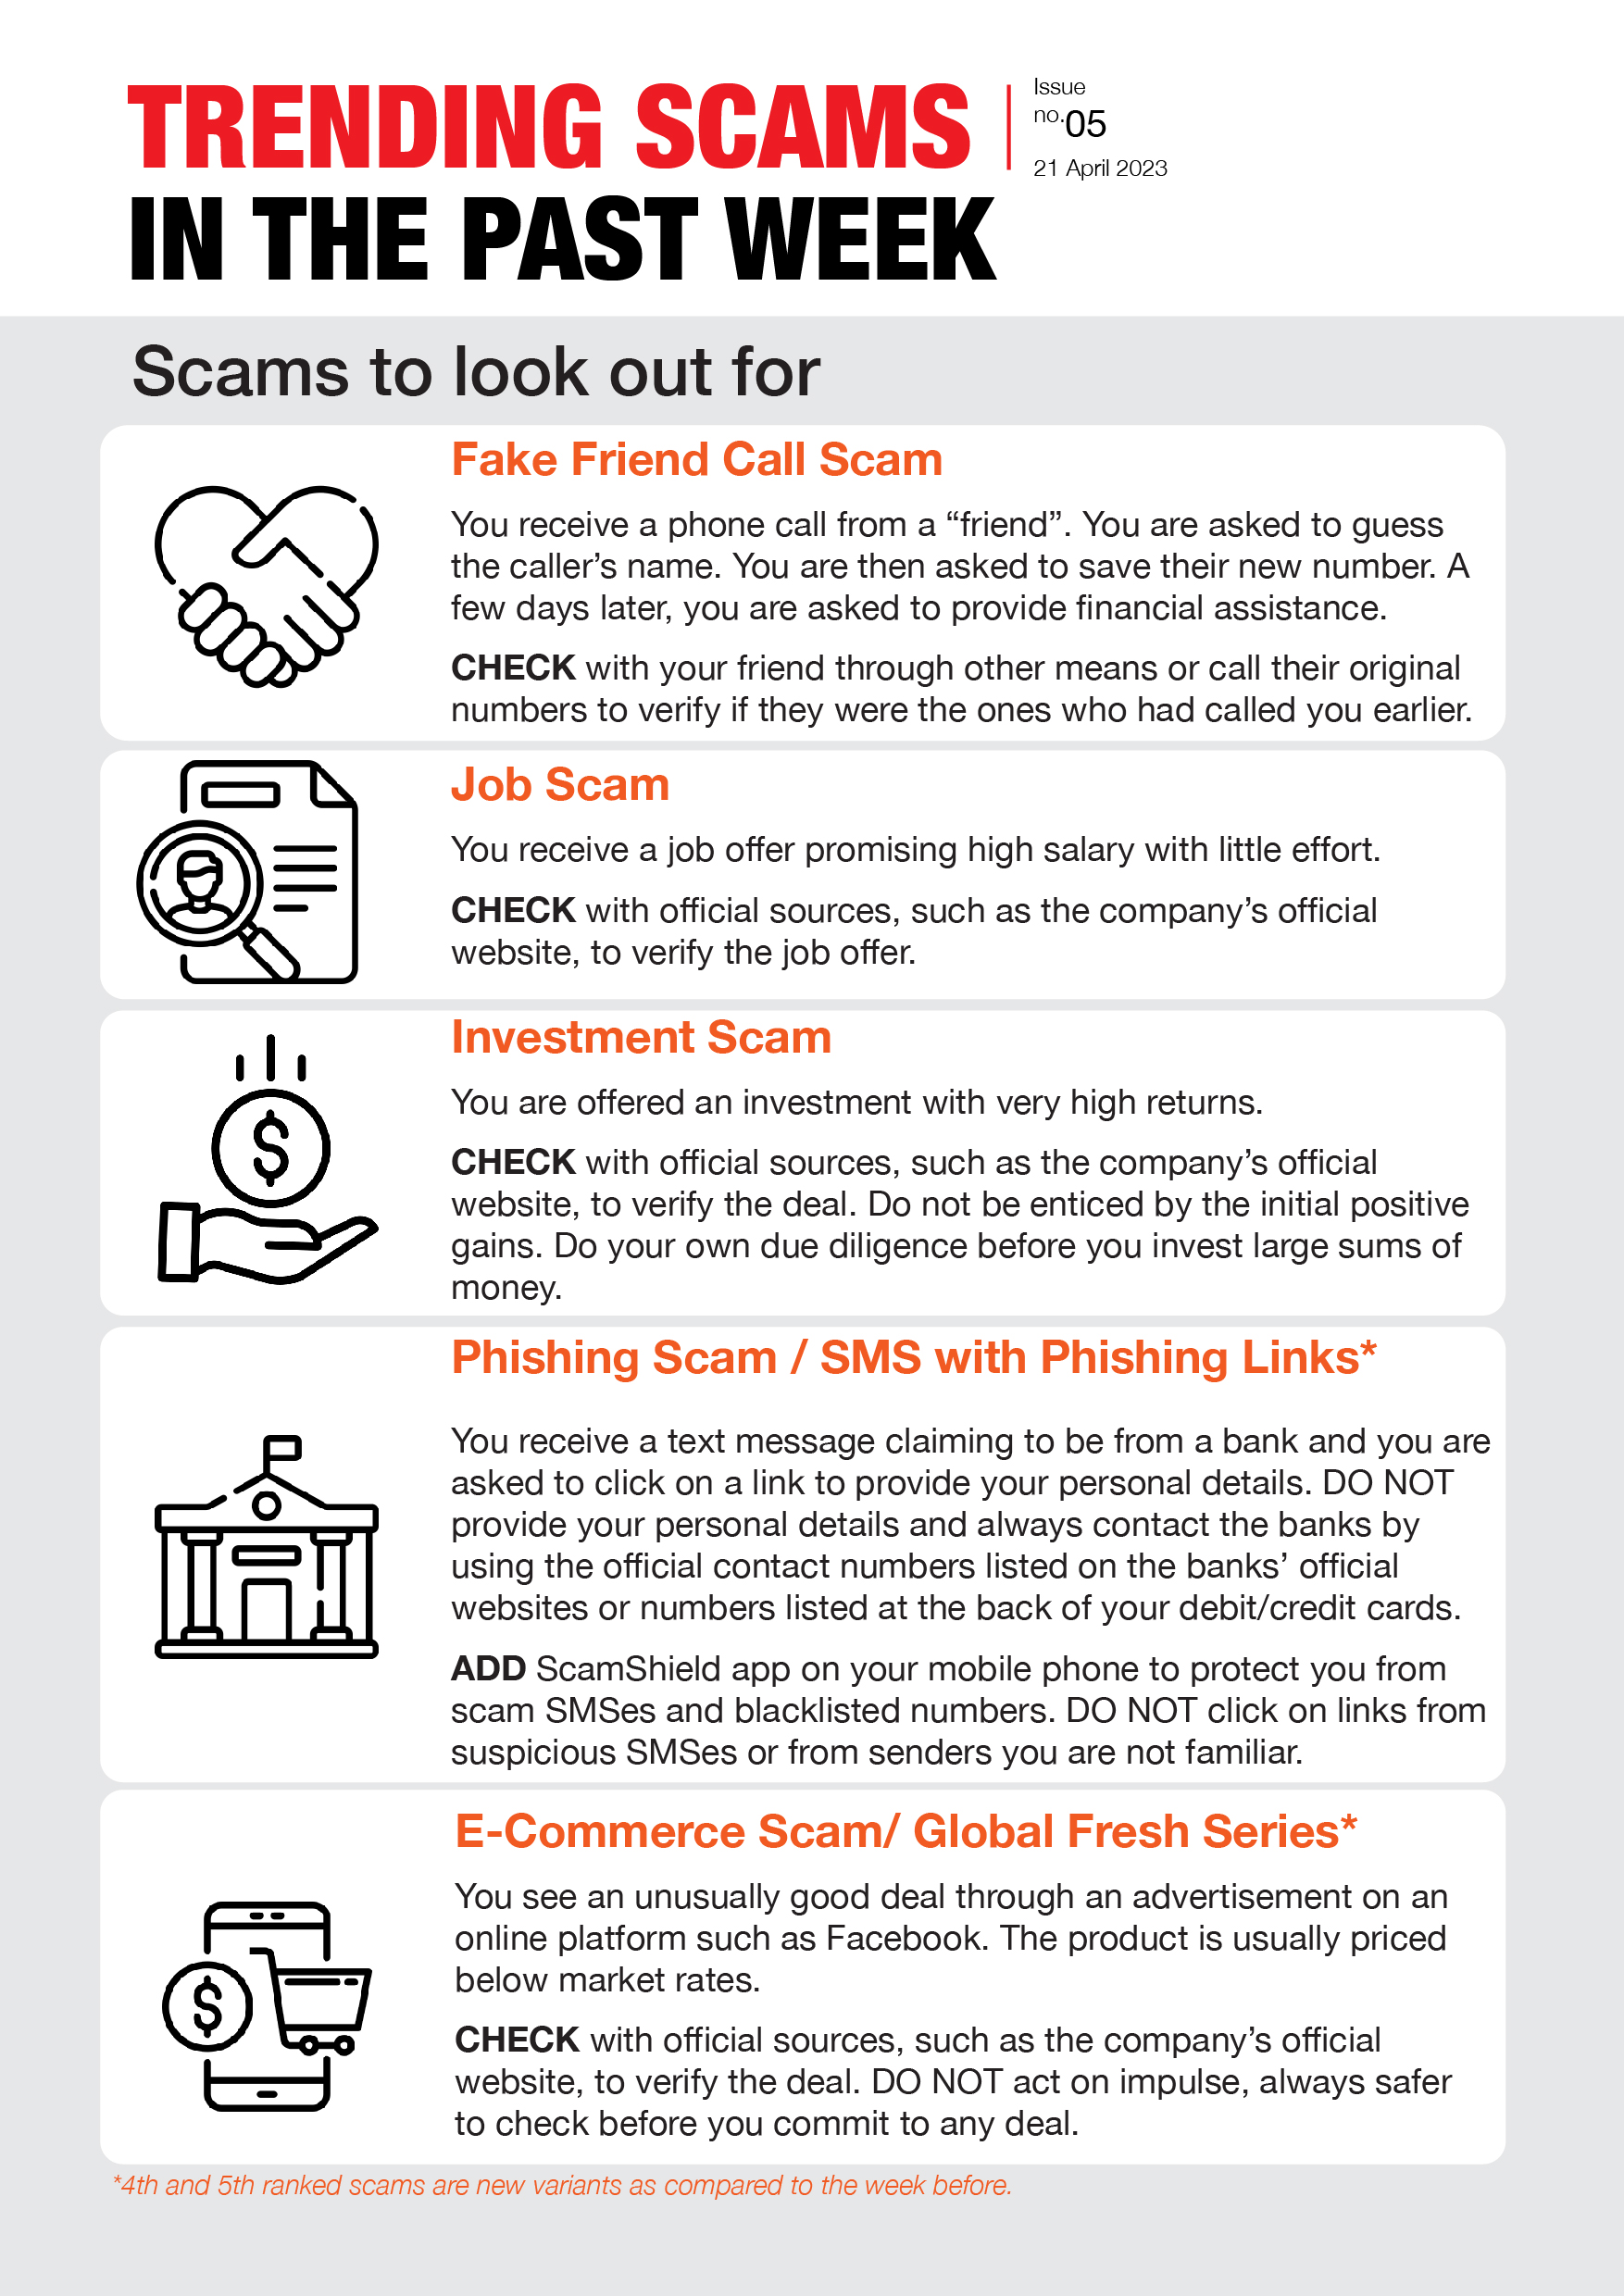 Weekly Bulletin Issue 5 - Scams to look out for